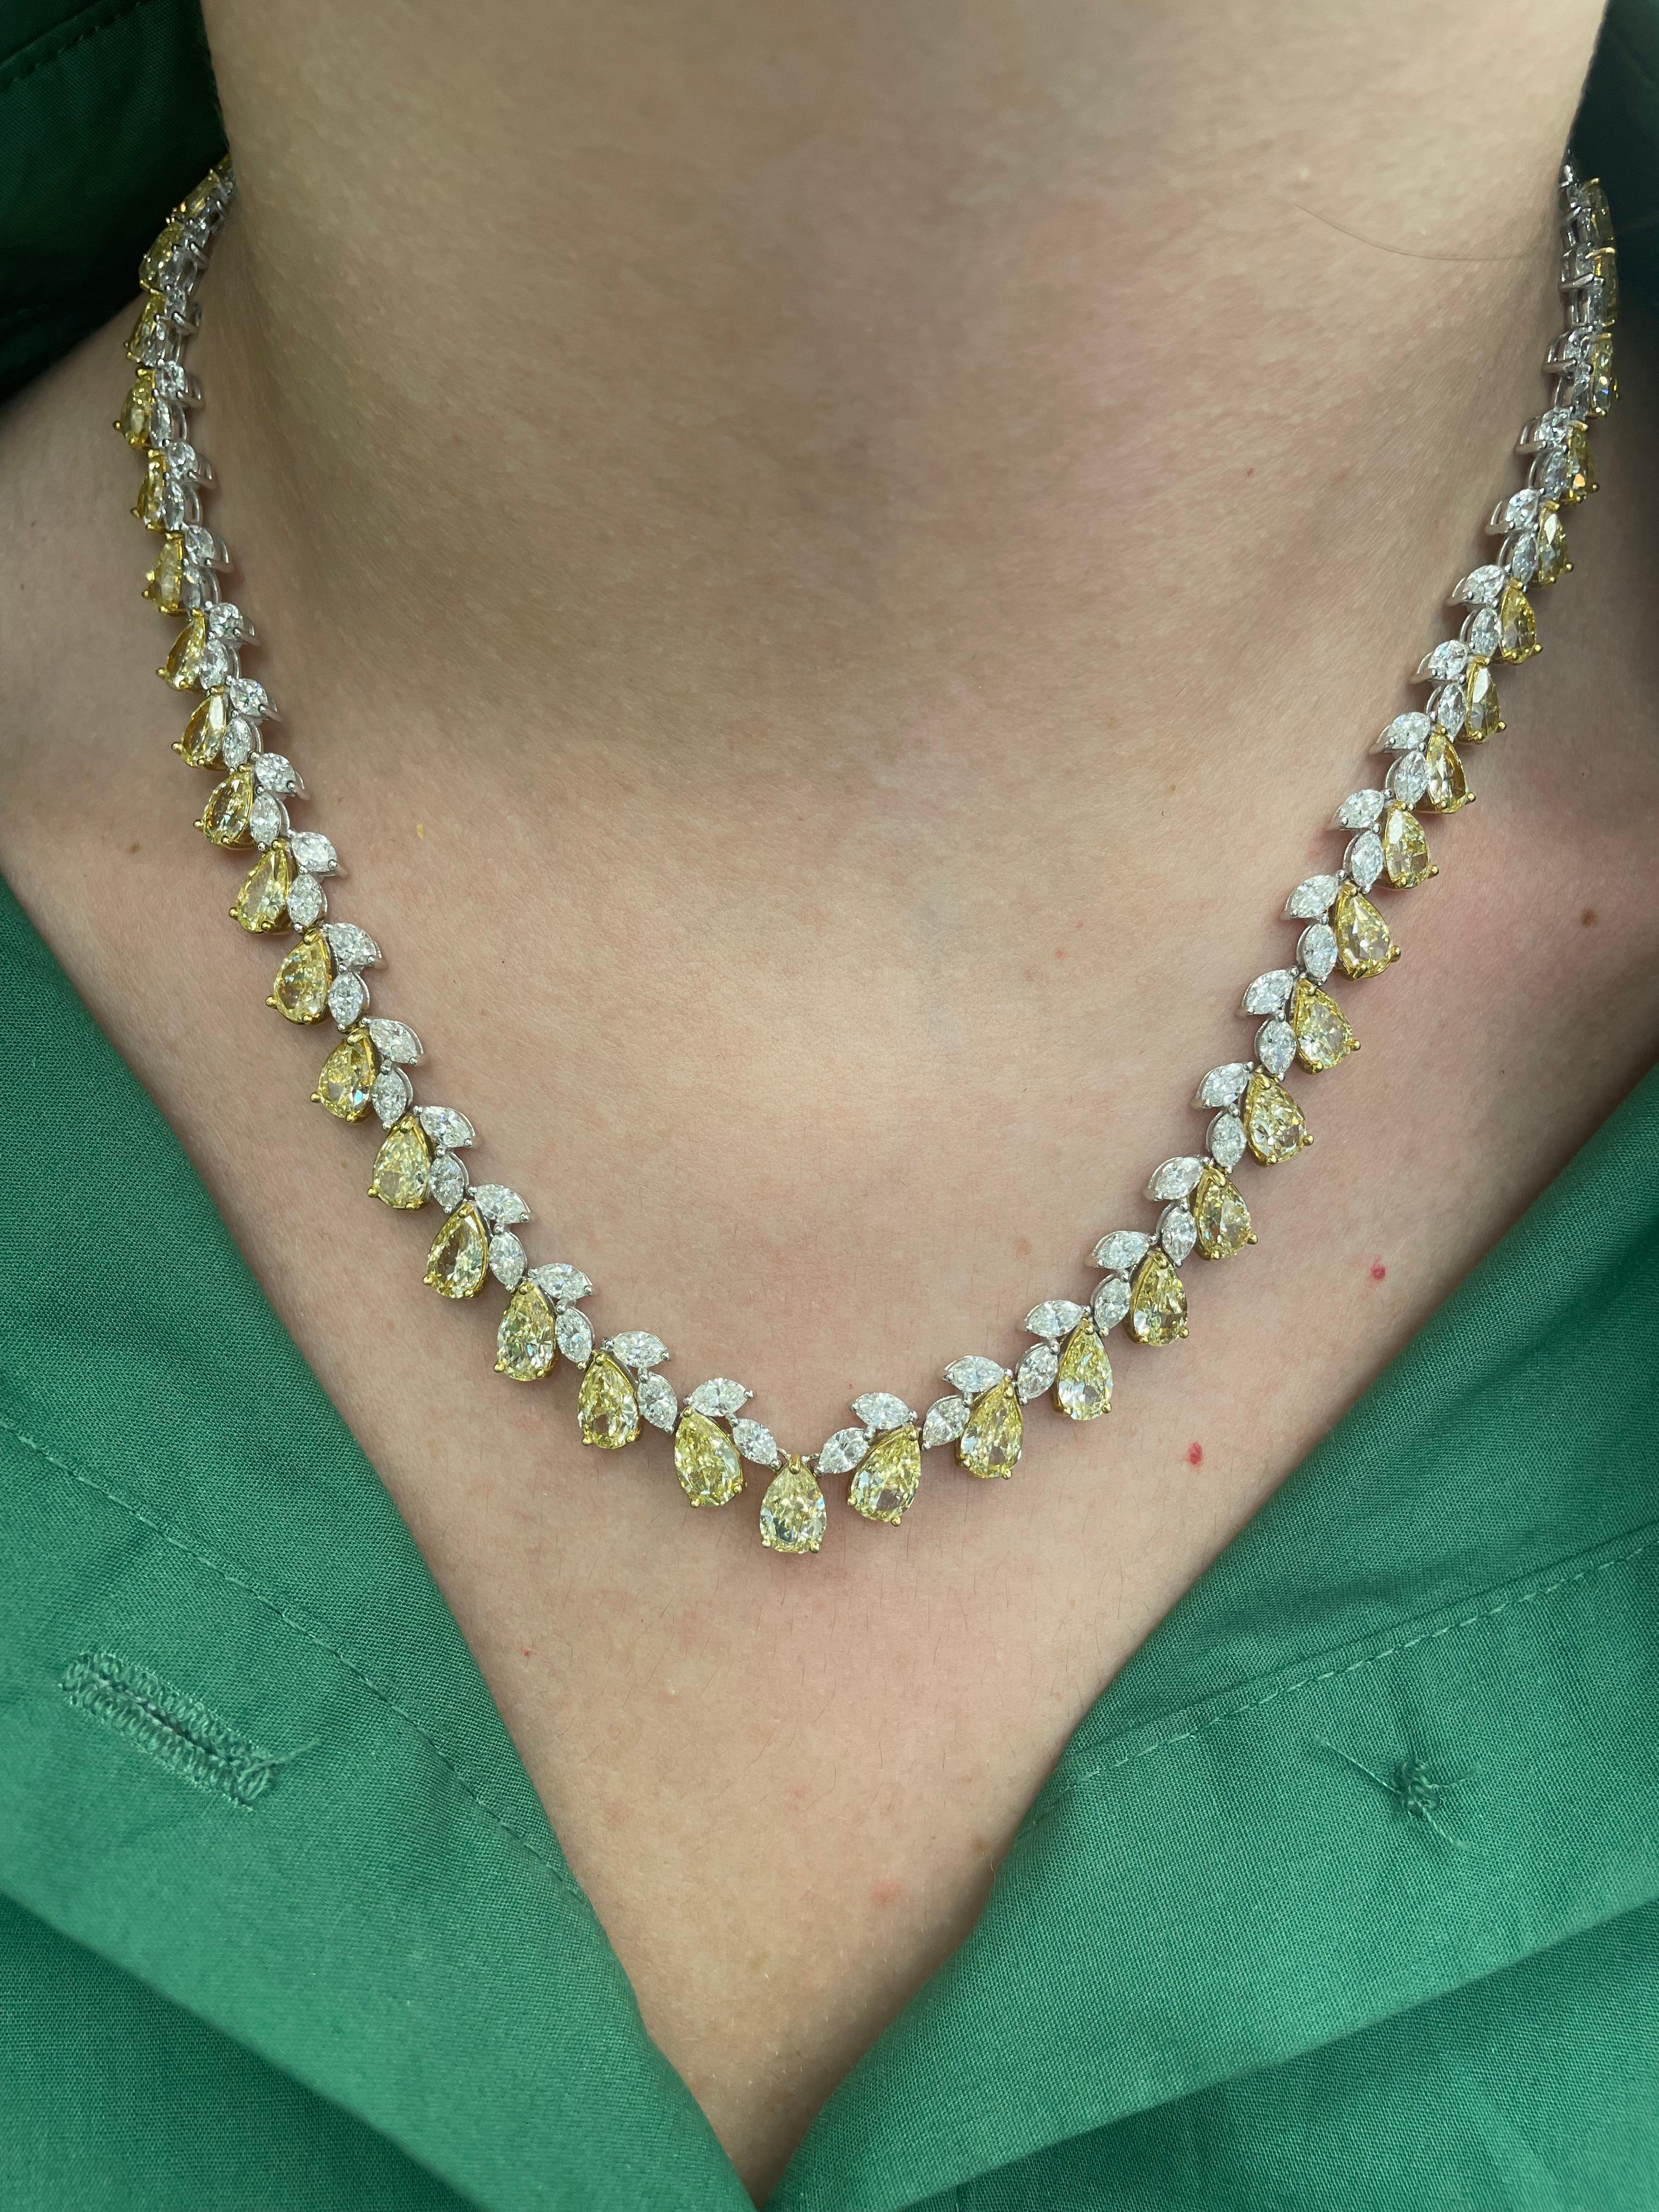 Beautiful yet unique alternating diamond tennis necklace. High jewelry by Alexander Beverly Hills.
50.14 carats total diamond weight.
58 pear shape yellow diamonds, 35.42 carats. Approximately Fancy Yellow color and VS-SI clarity. 118 marques cut